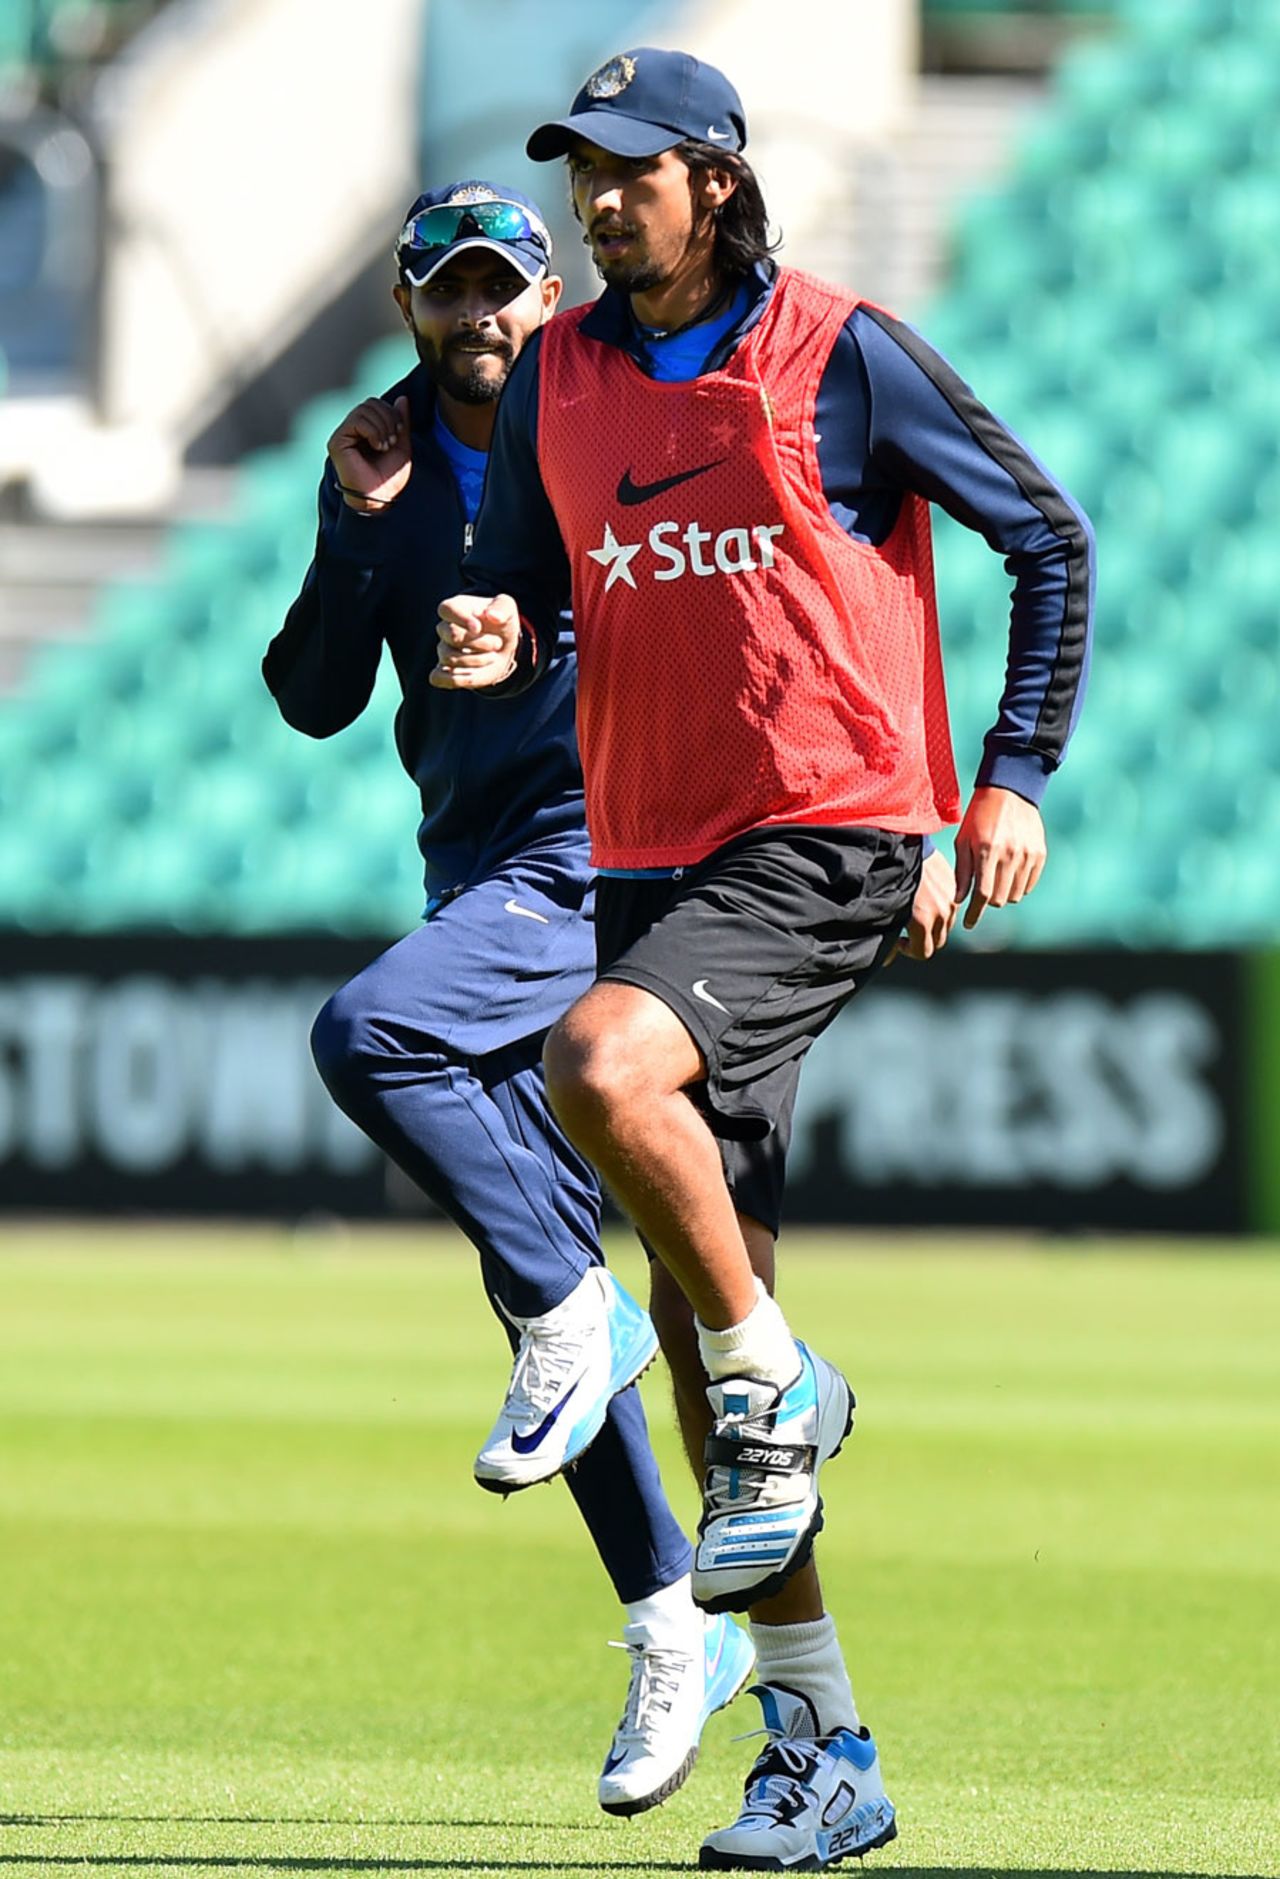 Ishant Sharma was fit for a practice session, The Oval, August 13, 2014